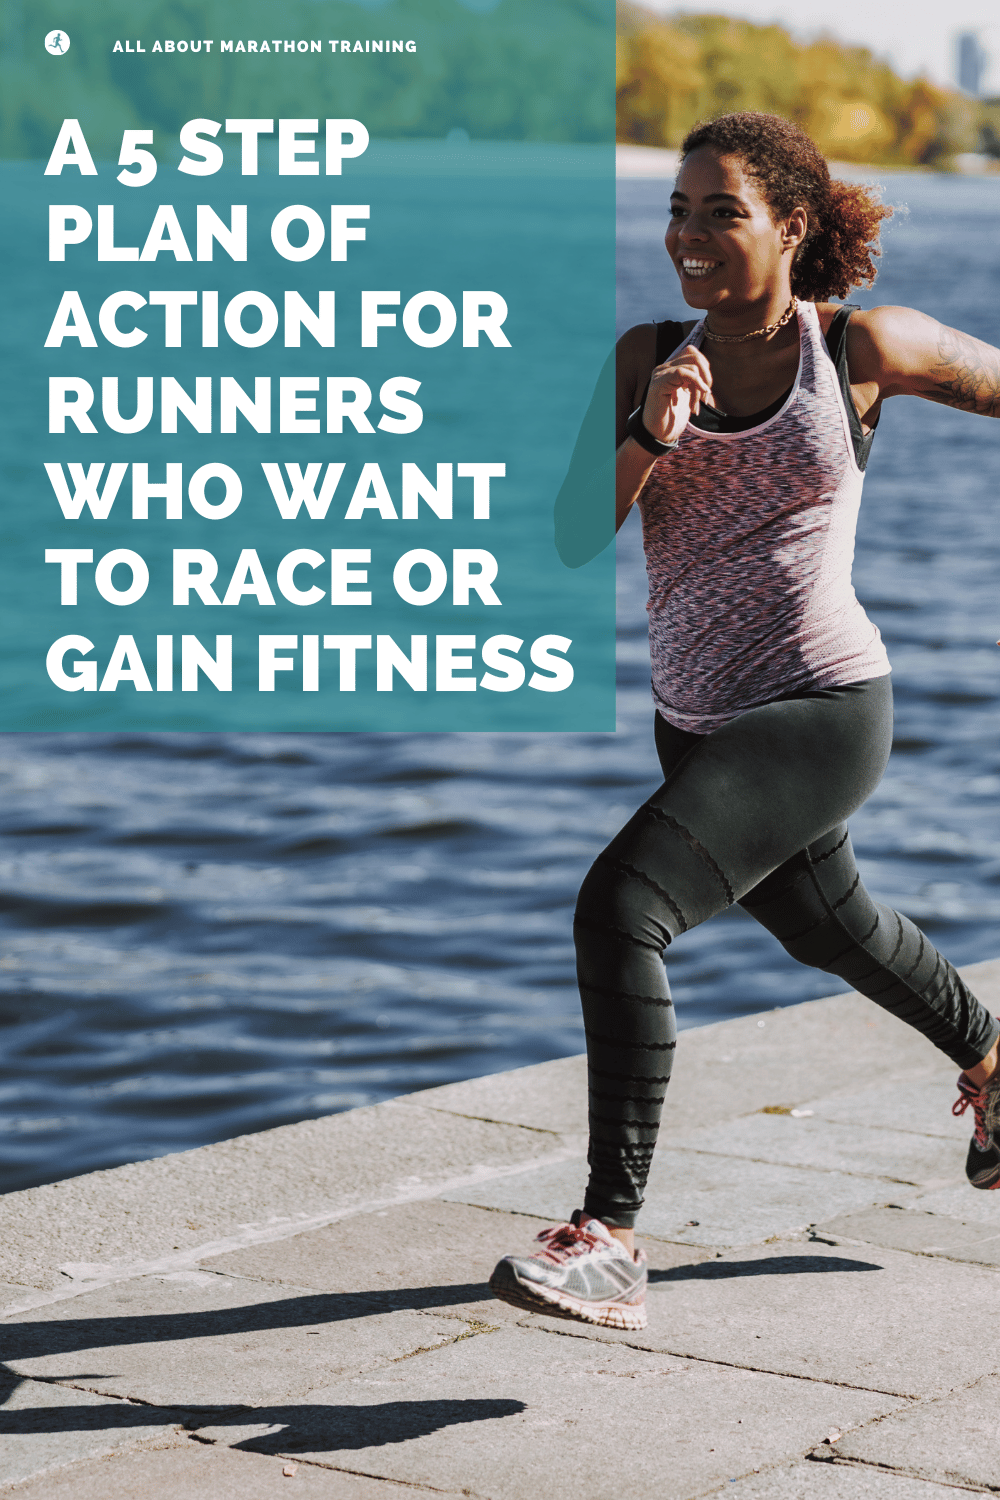 5 Step Plan of Action for Runners